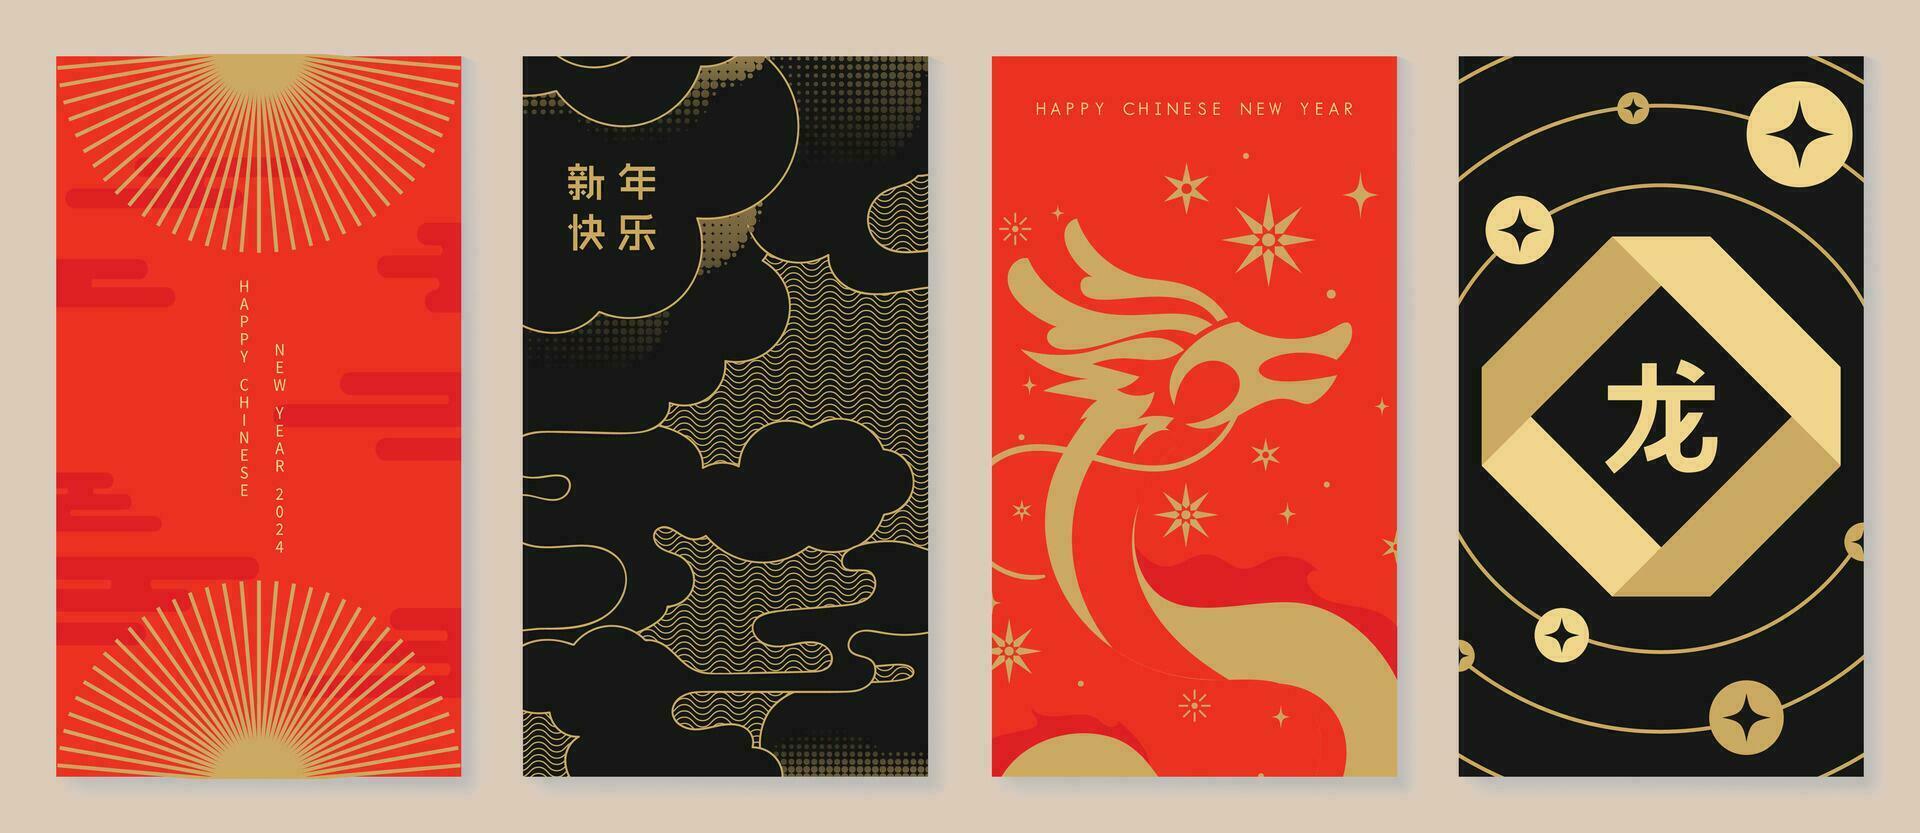 Happy Chinese New Year cover background vector. Year of the dragon design with golden dragon, coin,wind, cloud, halftone texture. Elegant oriental illustration for cover, banner, website, calendar. vector